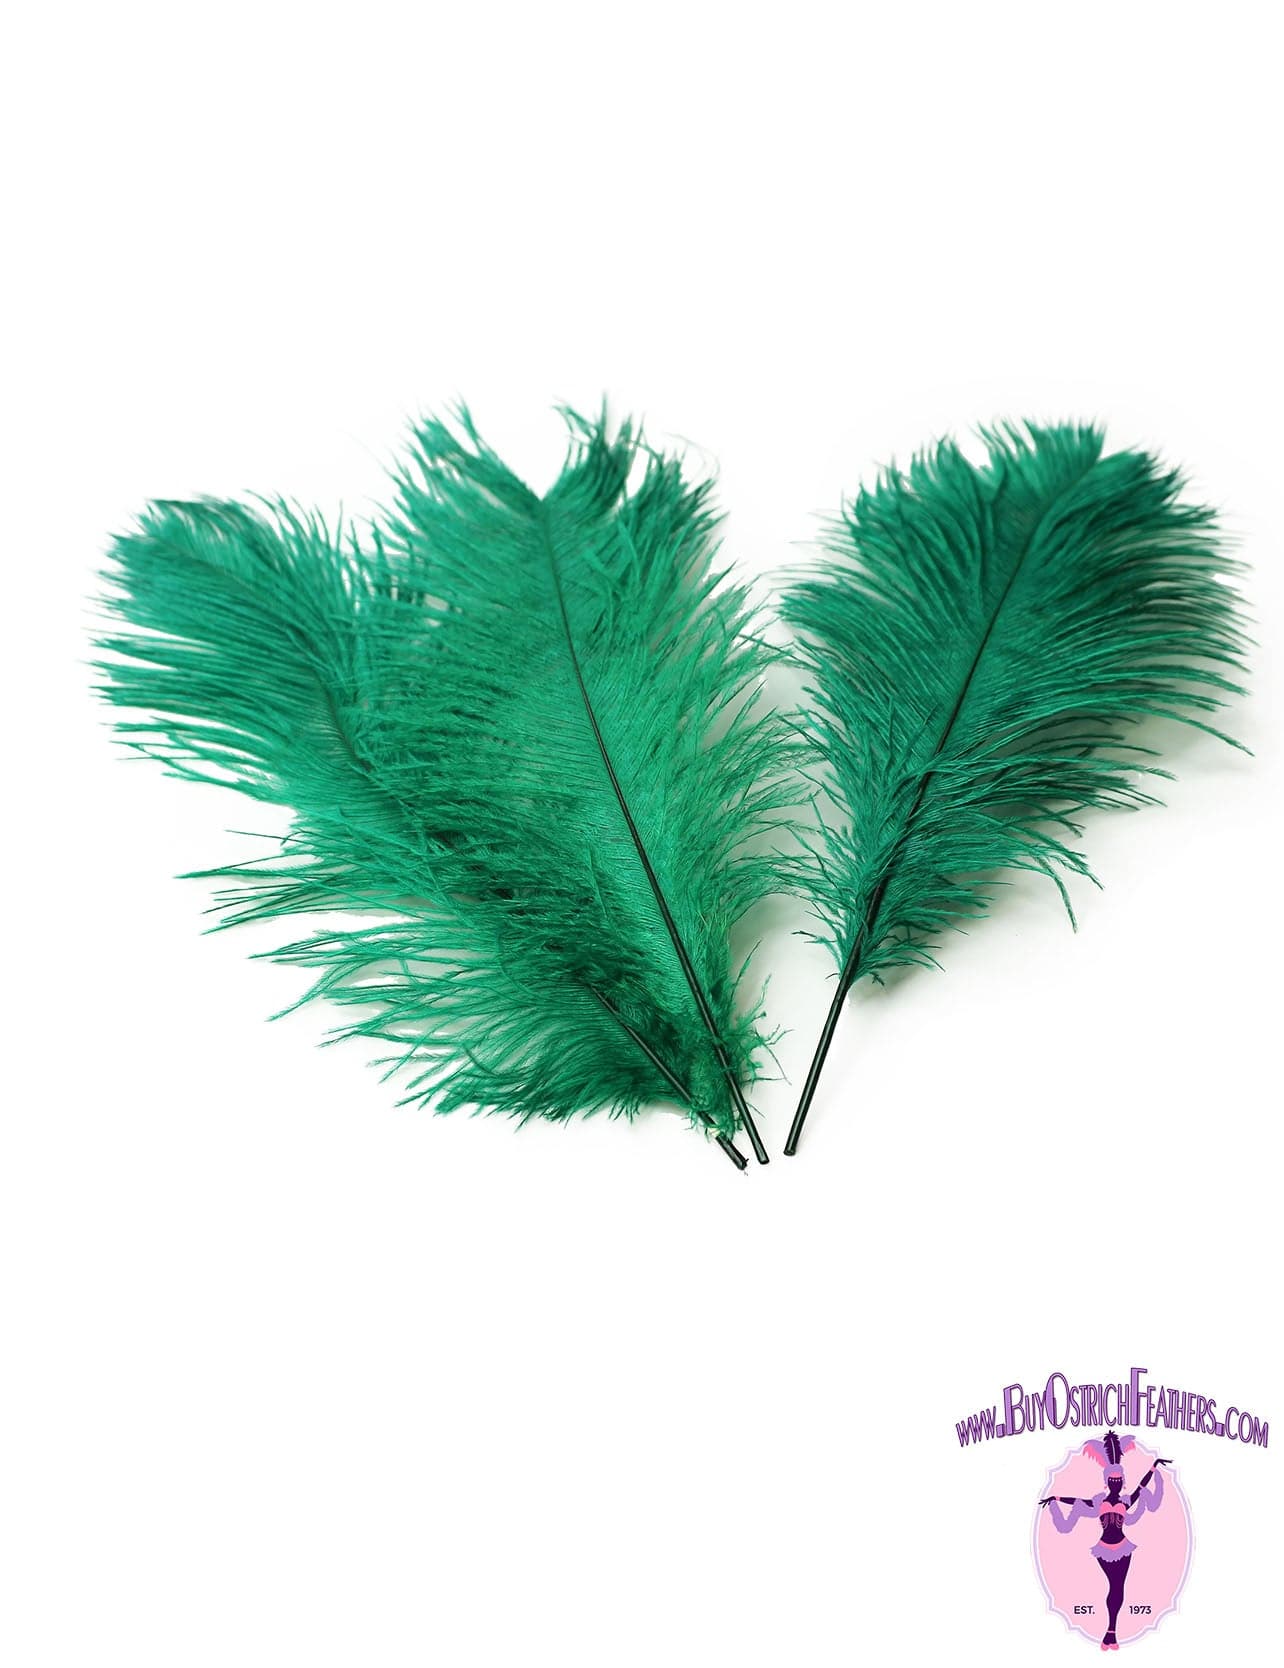 Ostrich Feather Tail Plumes 15-18" (Emerald Green) - Buy Ostrich Feathers